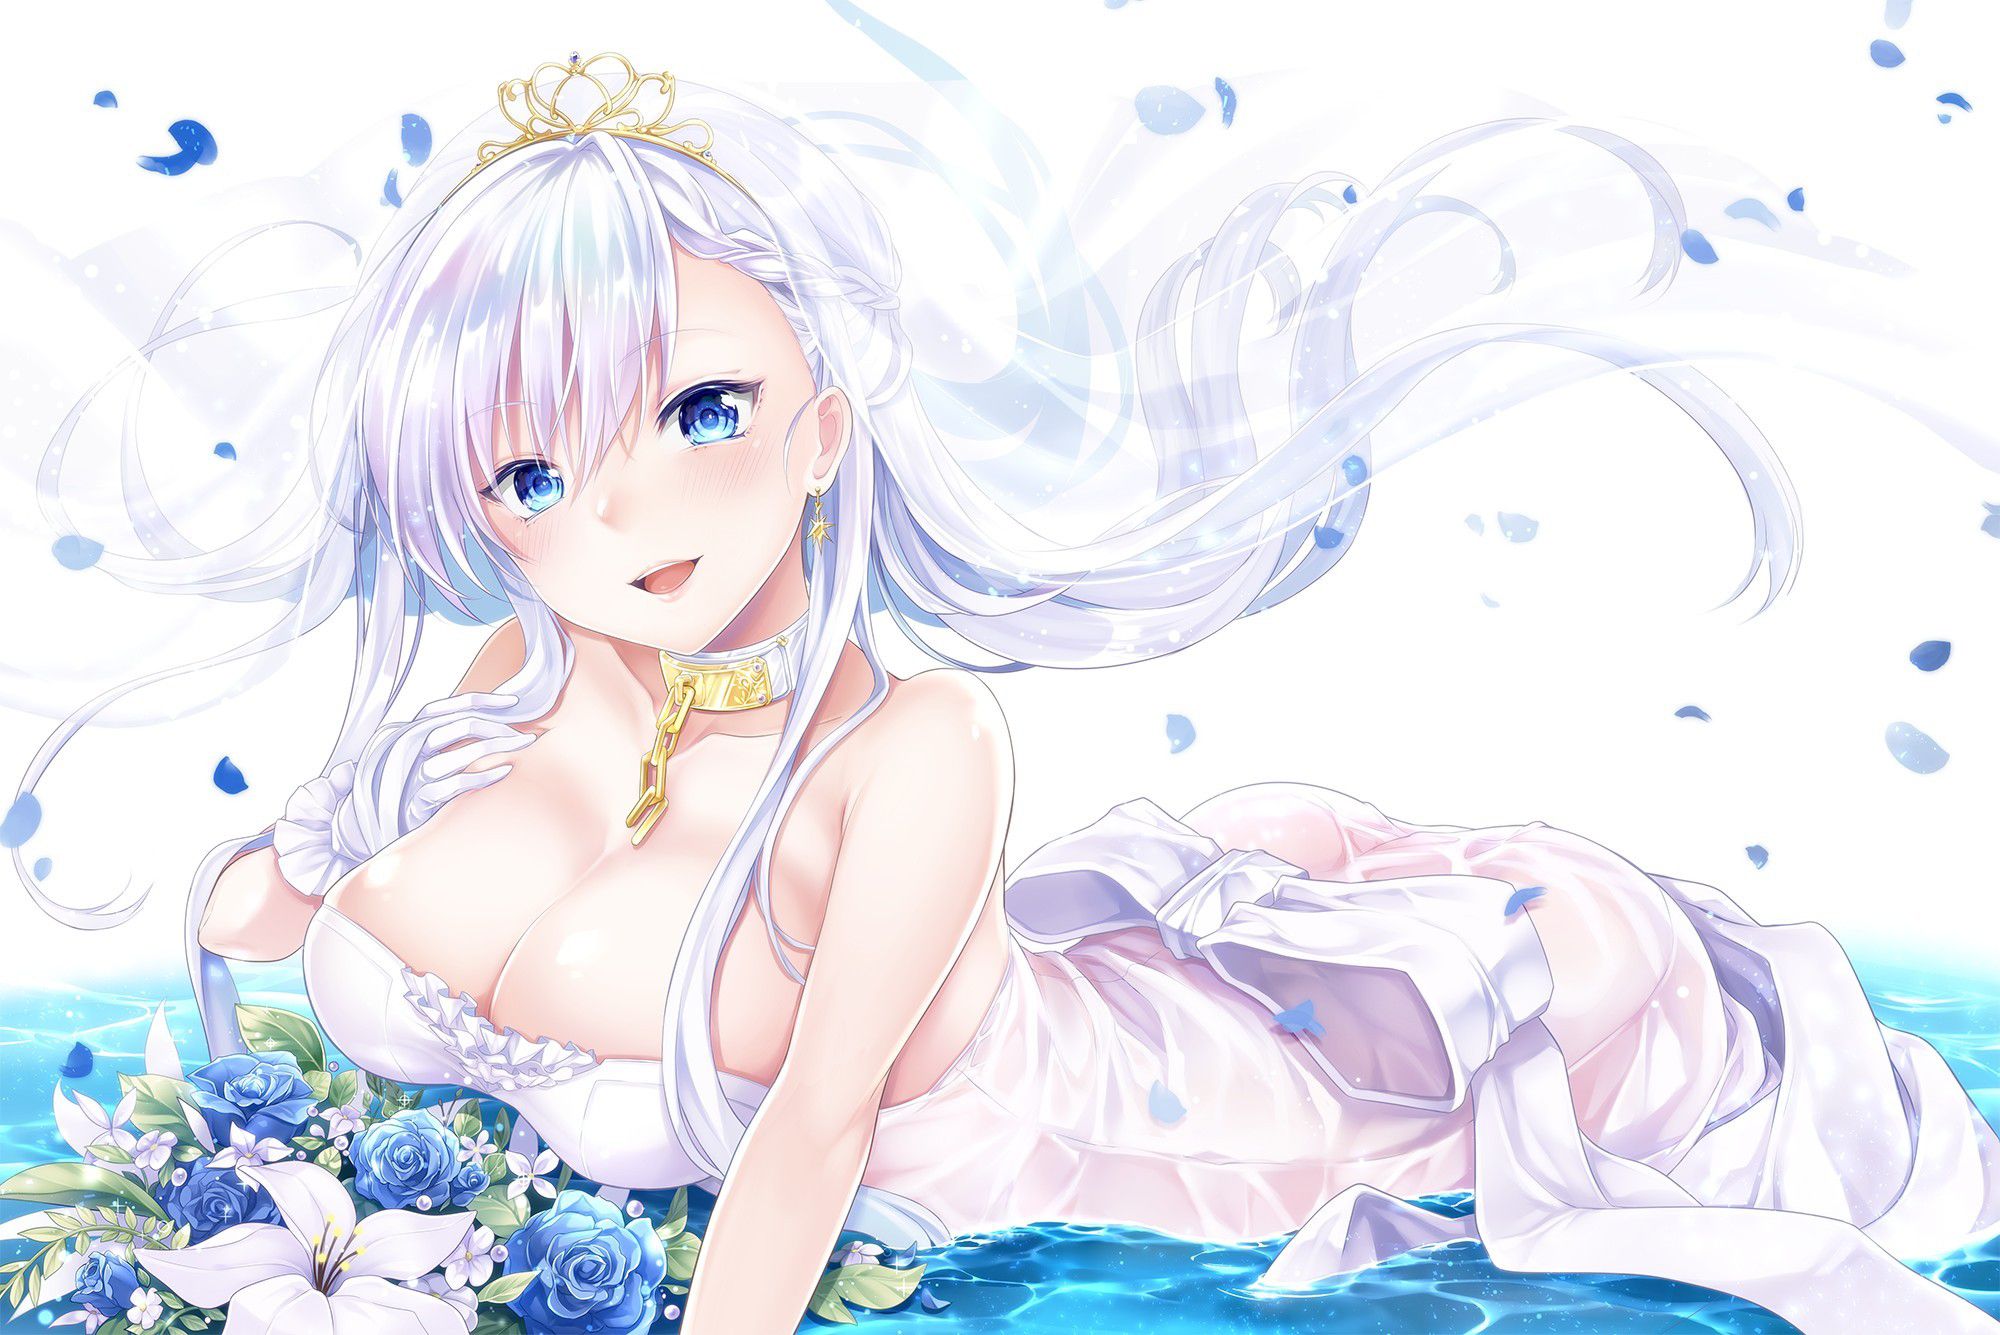 [2nd] Second erotic image of the girl in the wedding dress 15 [wedding dress] 35